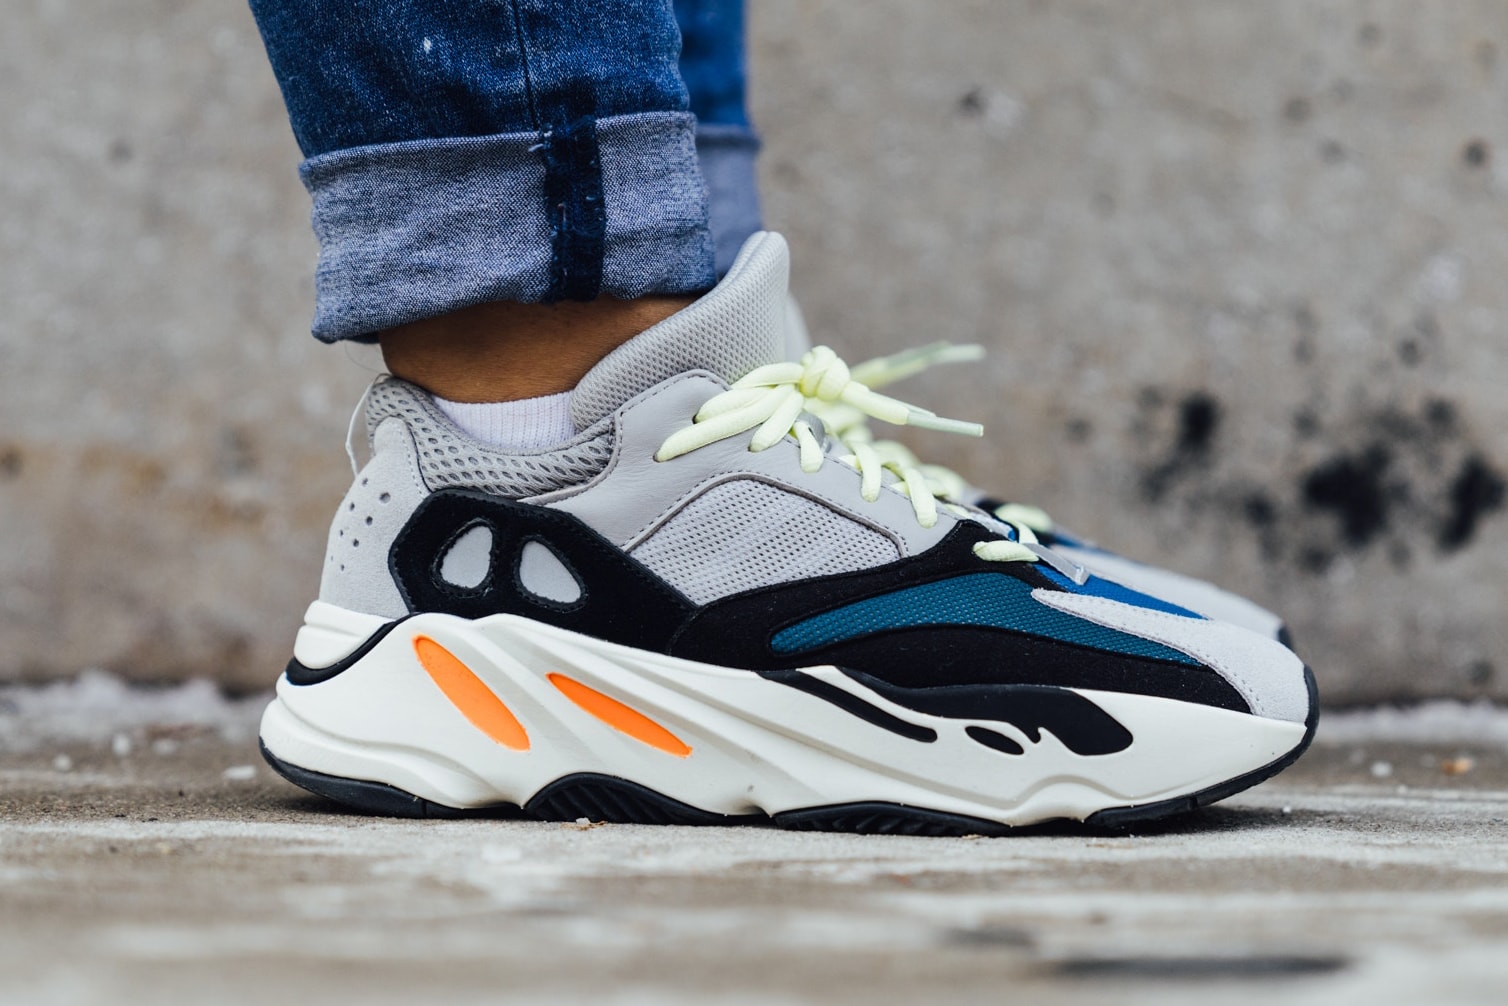 YEEZY Wave Runner 700 Global Re-Stock Where To Buy Release Kanye West Sneaker Shoe